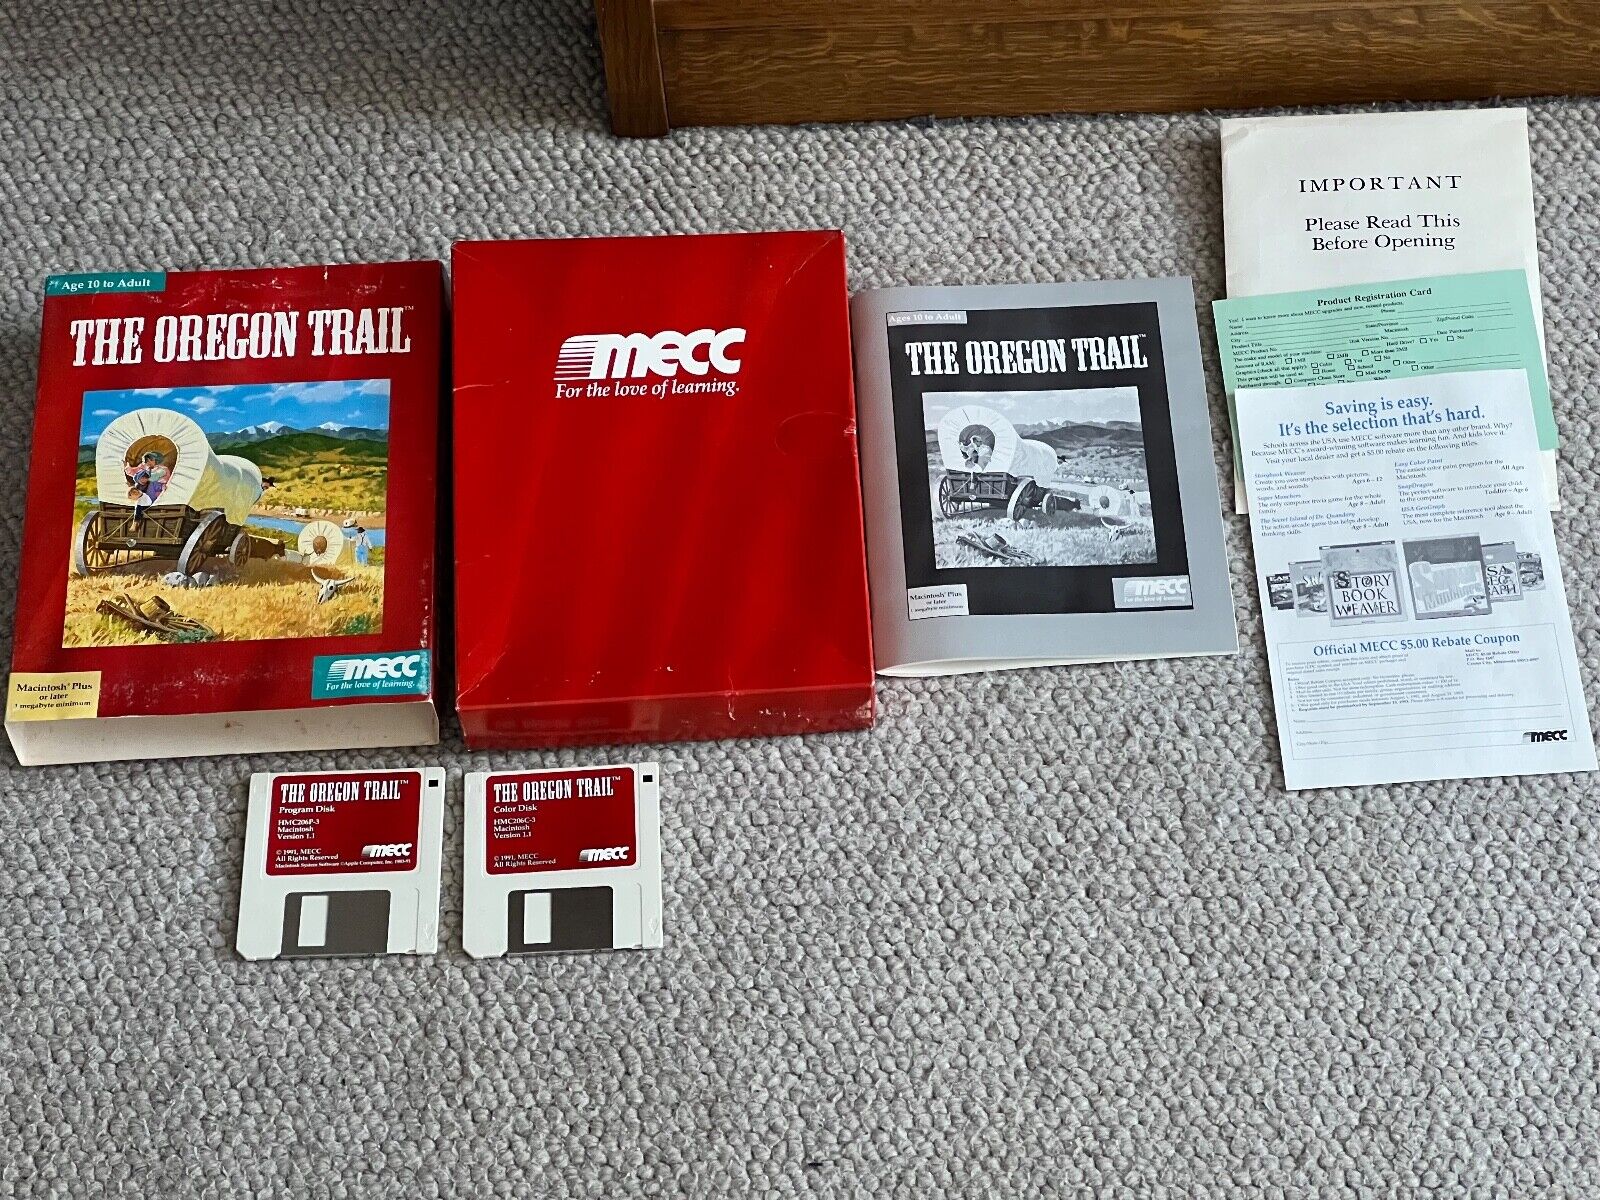 The Oregon Trail vintage game for Mac Plus or later - 1991 diskettes box manual